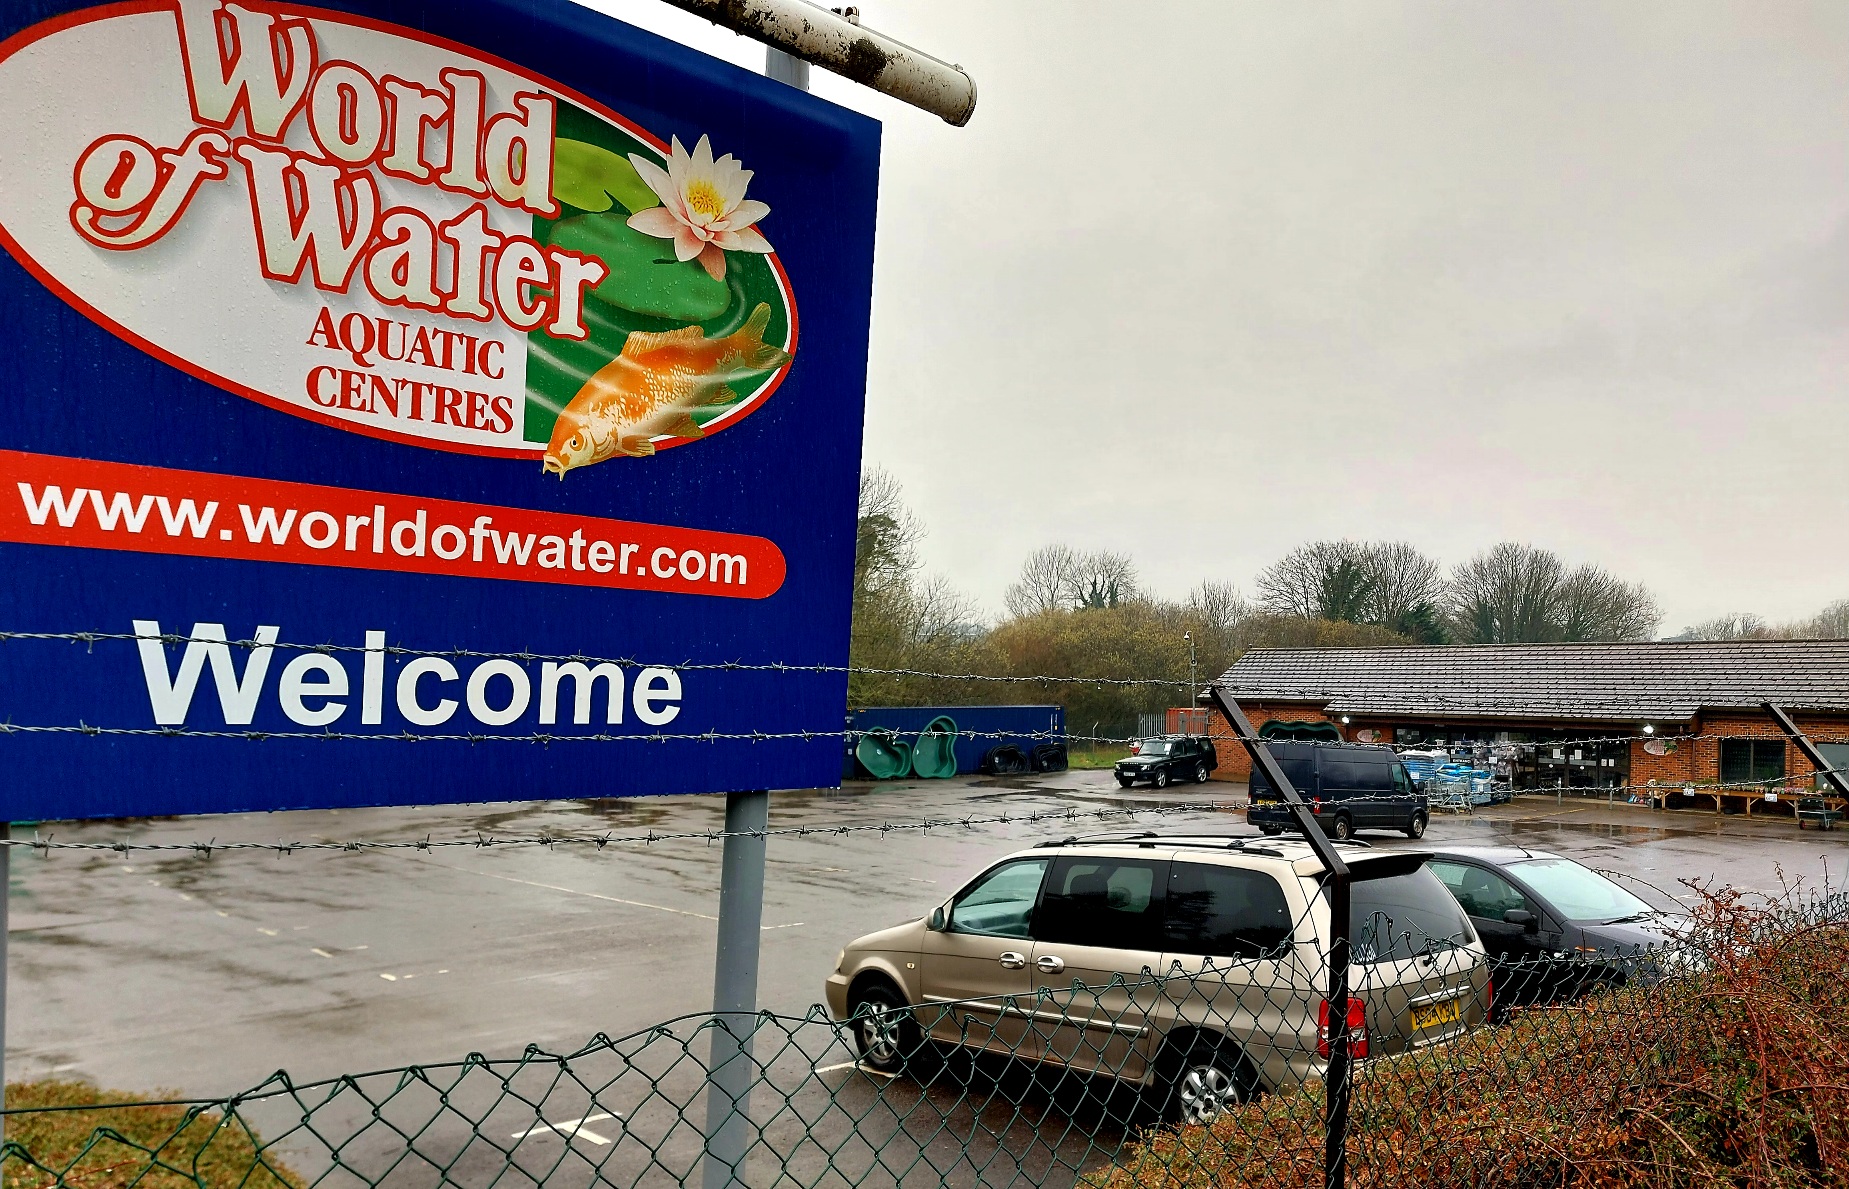 Lidl expansion plans to build on the World of Water site